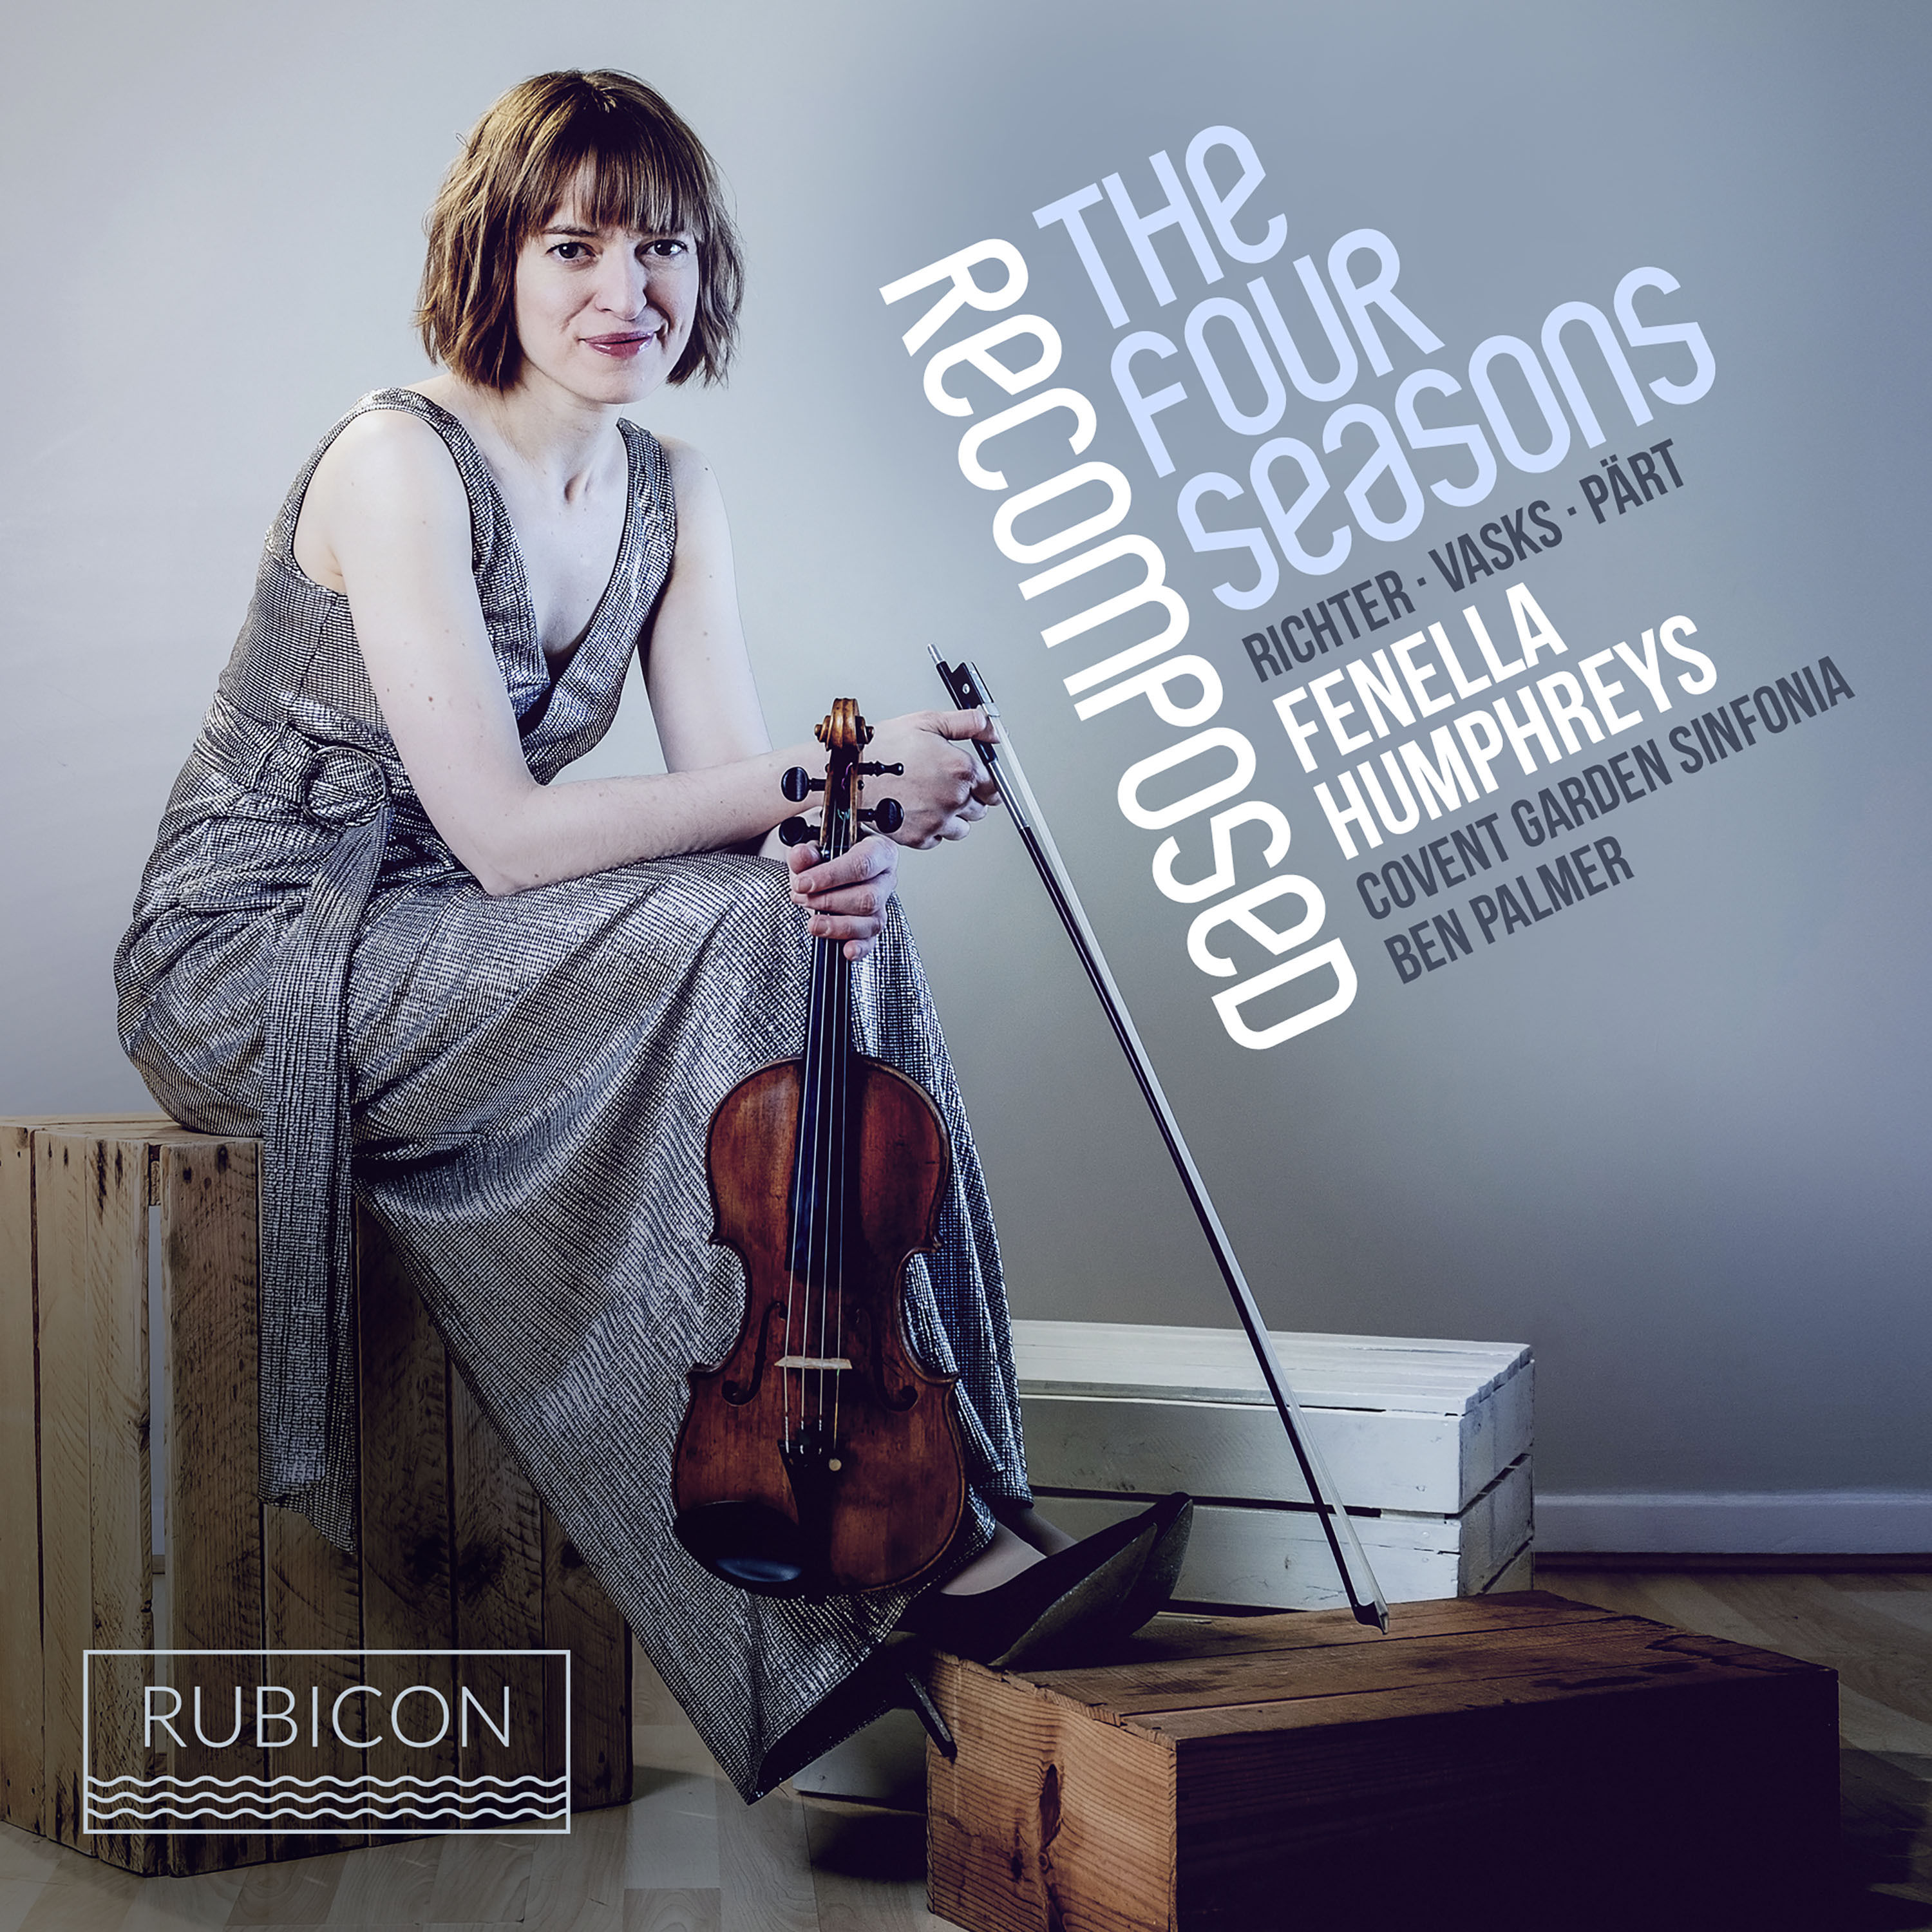 Fenella Humphreys – Vivaldi: The Four Seasons Recomposed by Max Richter (2019) [FLAC 24bit/96kHz]